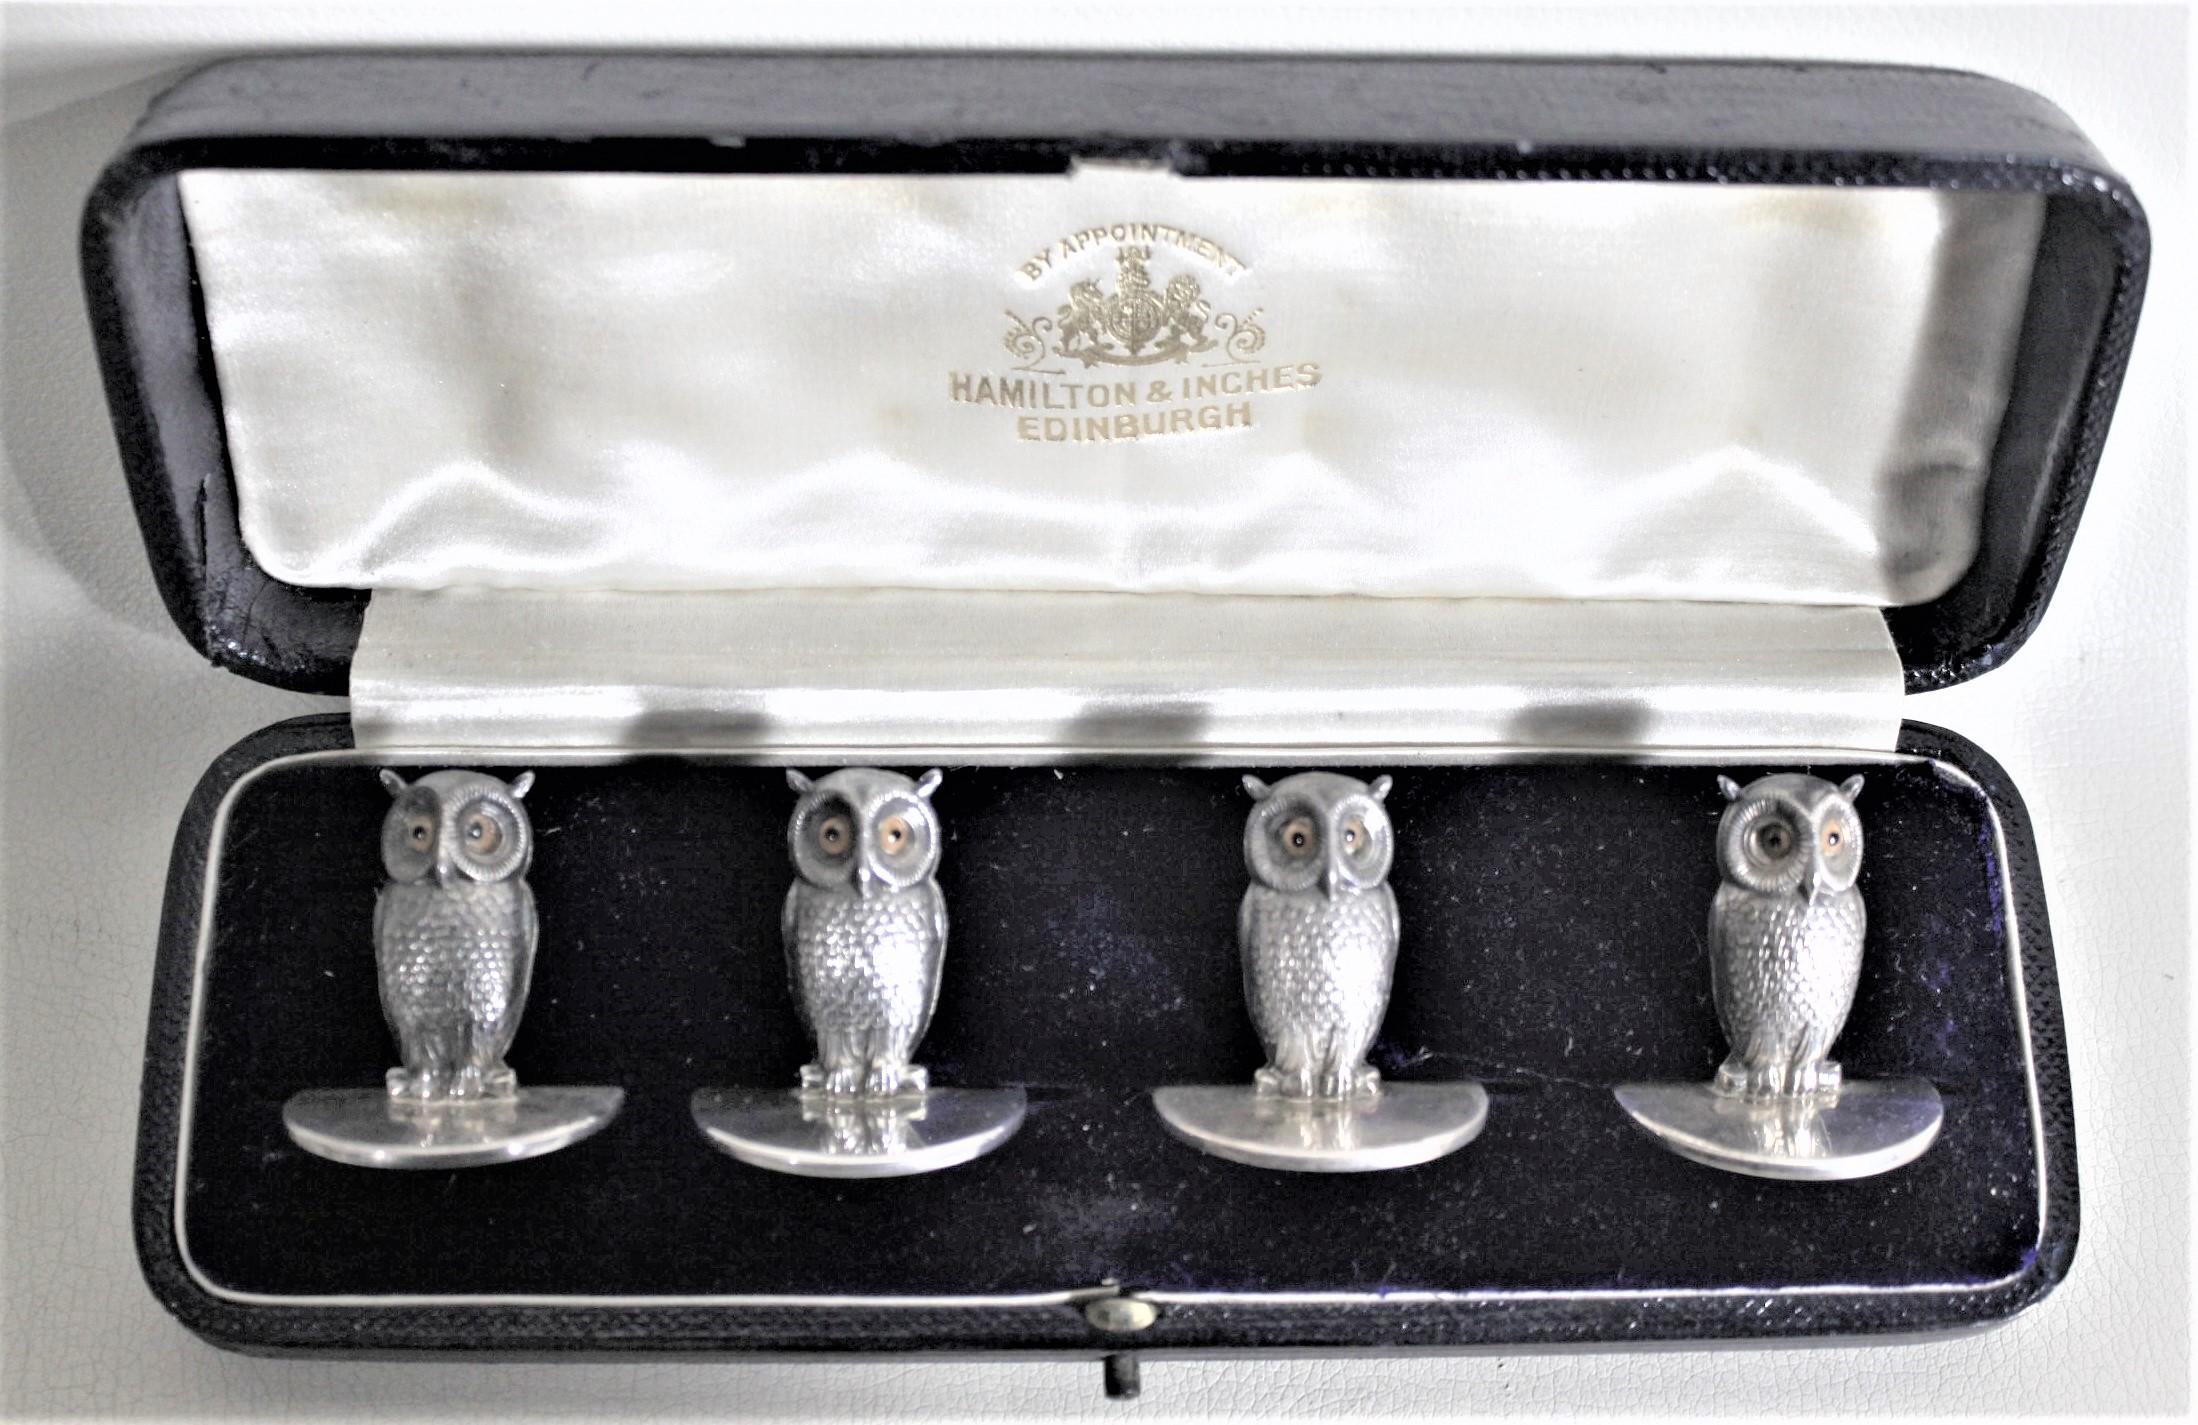 This set of four antique sterling silver place card or menu holders was made in Chester England in 1904 in the period Edwardian style. The card holders are each done as detailed figural owls with hand-painted eyes. The card holders have sturdy clips